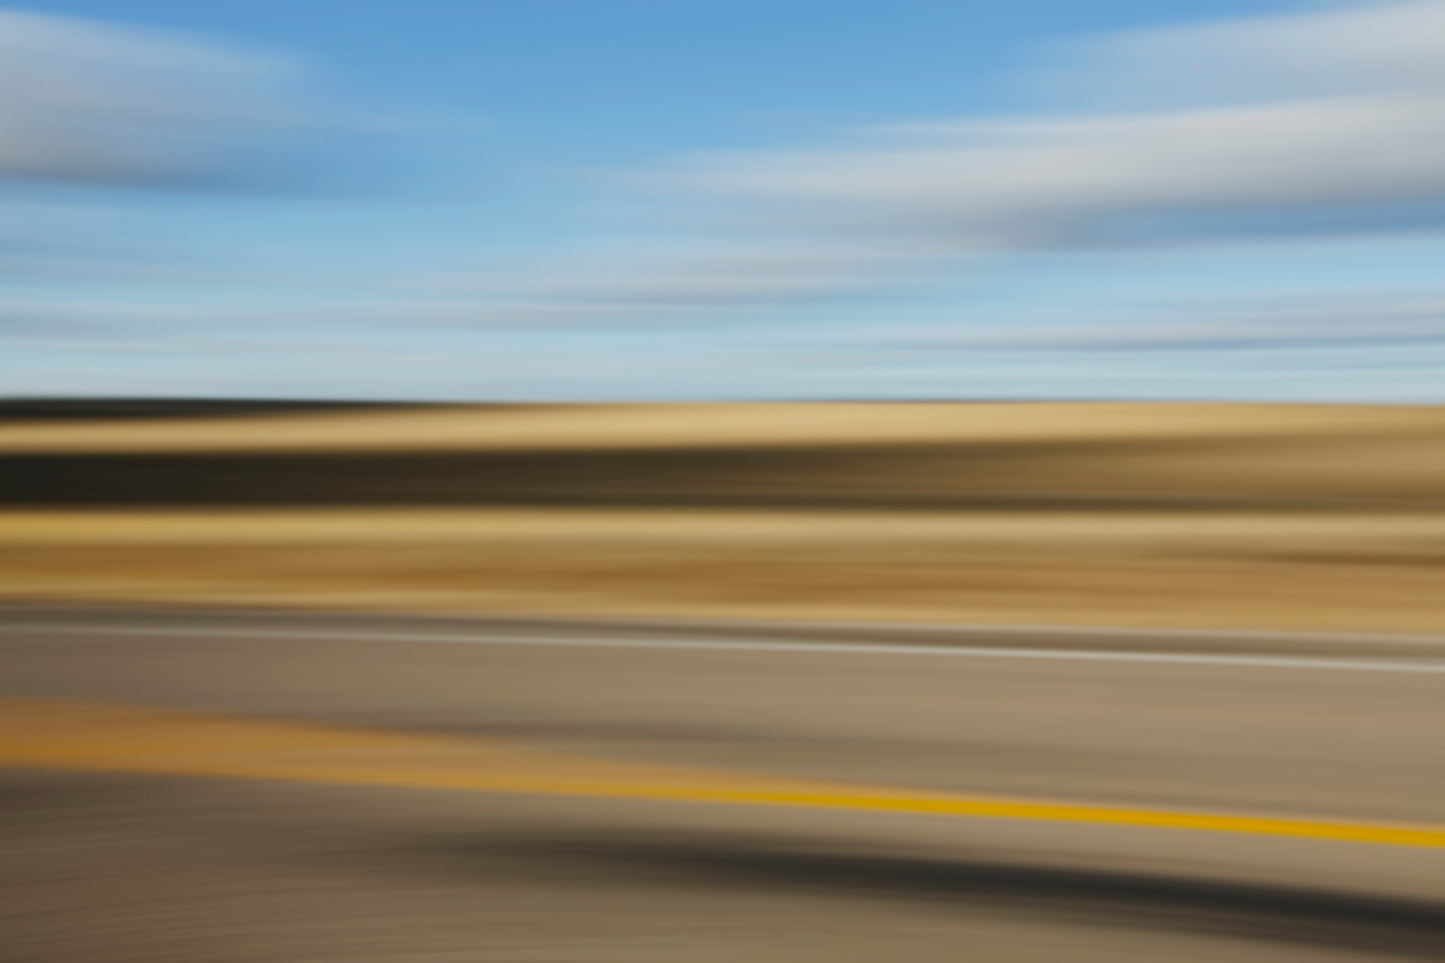 Blurred Road and Sky